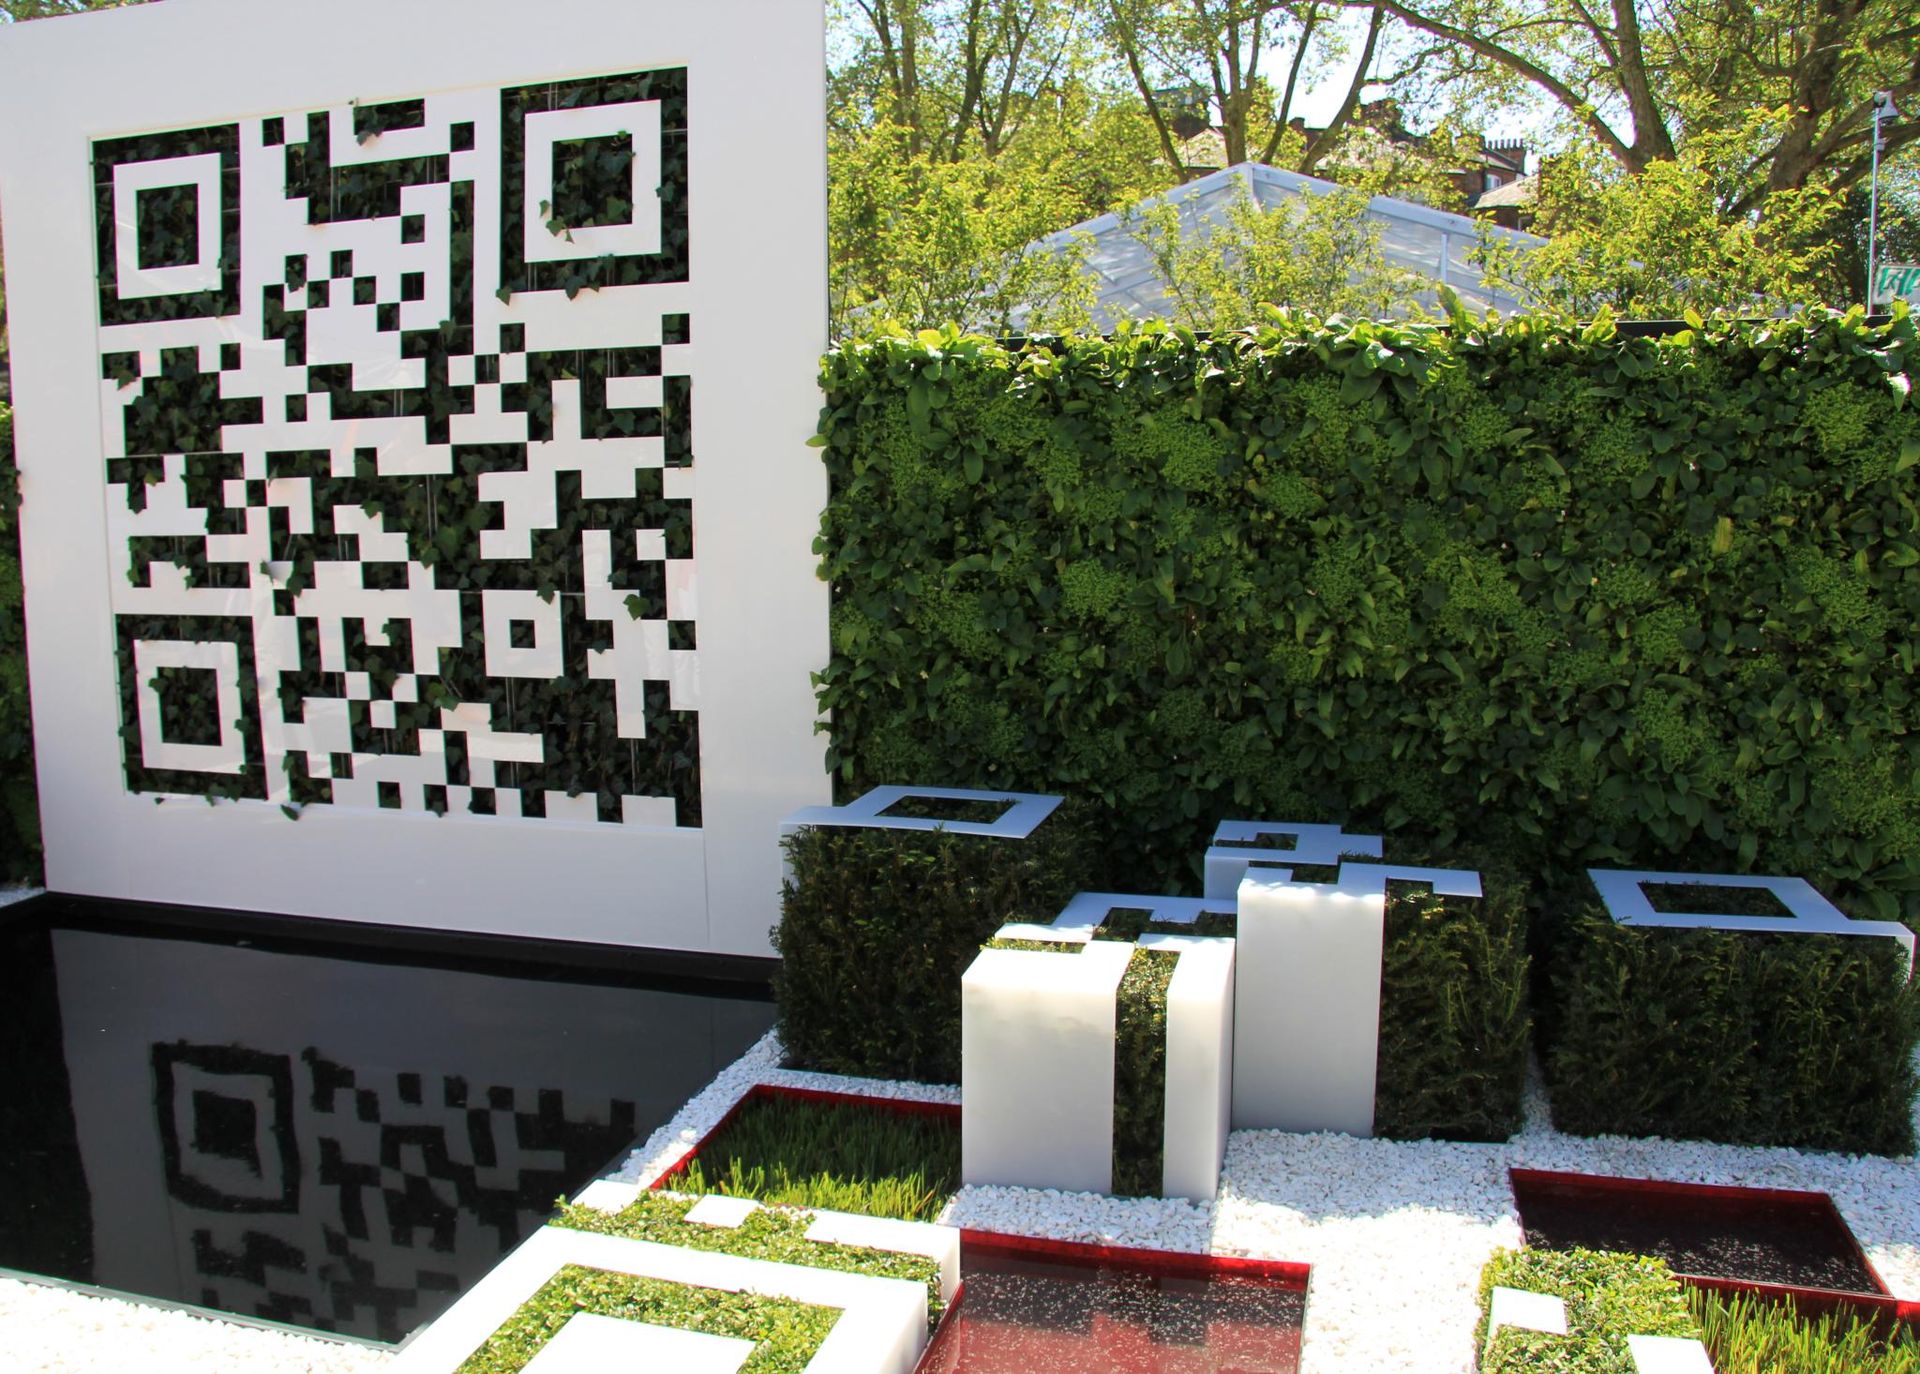 Creating QR codes: A modern approach to information sharing